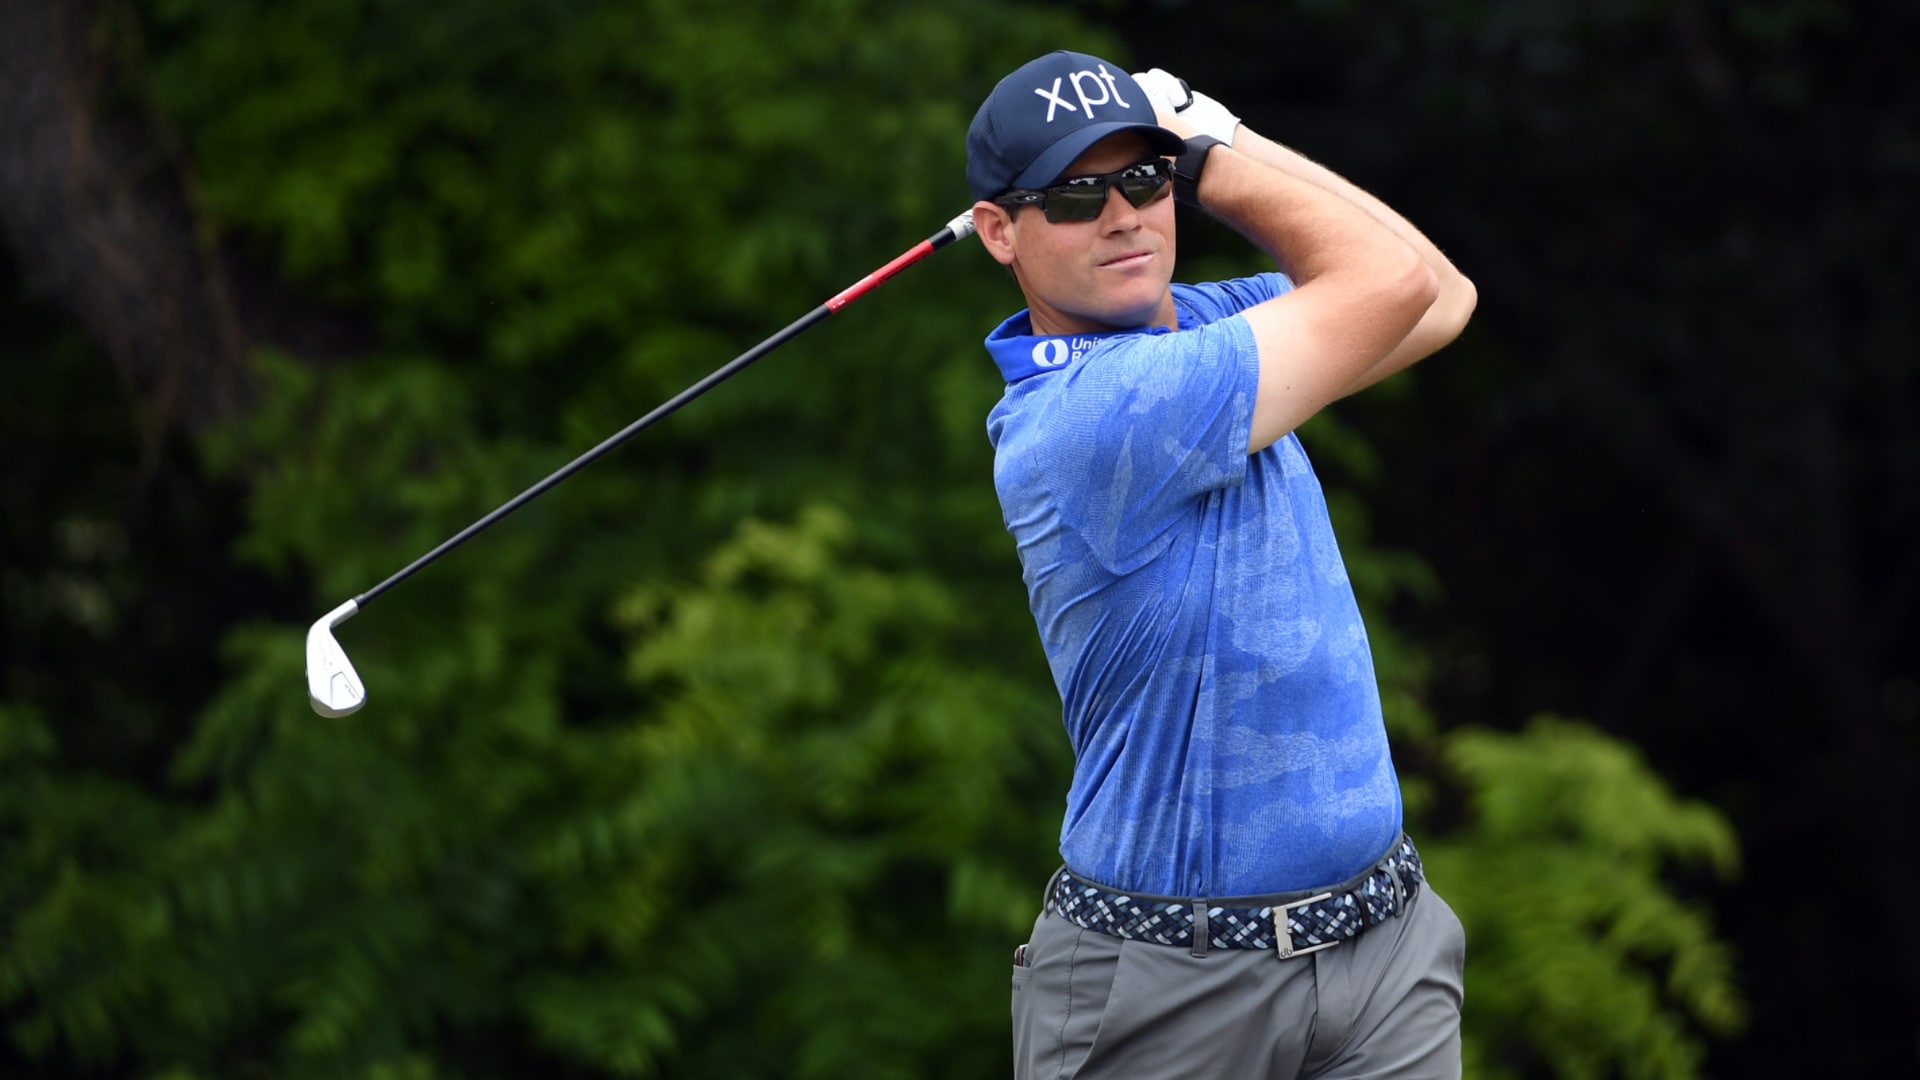 Schenk, Hall tied for Colonial lead after 3 rounds as both seek 1st PGA Tour win